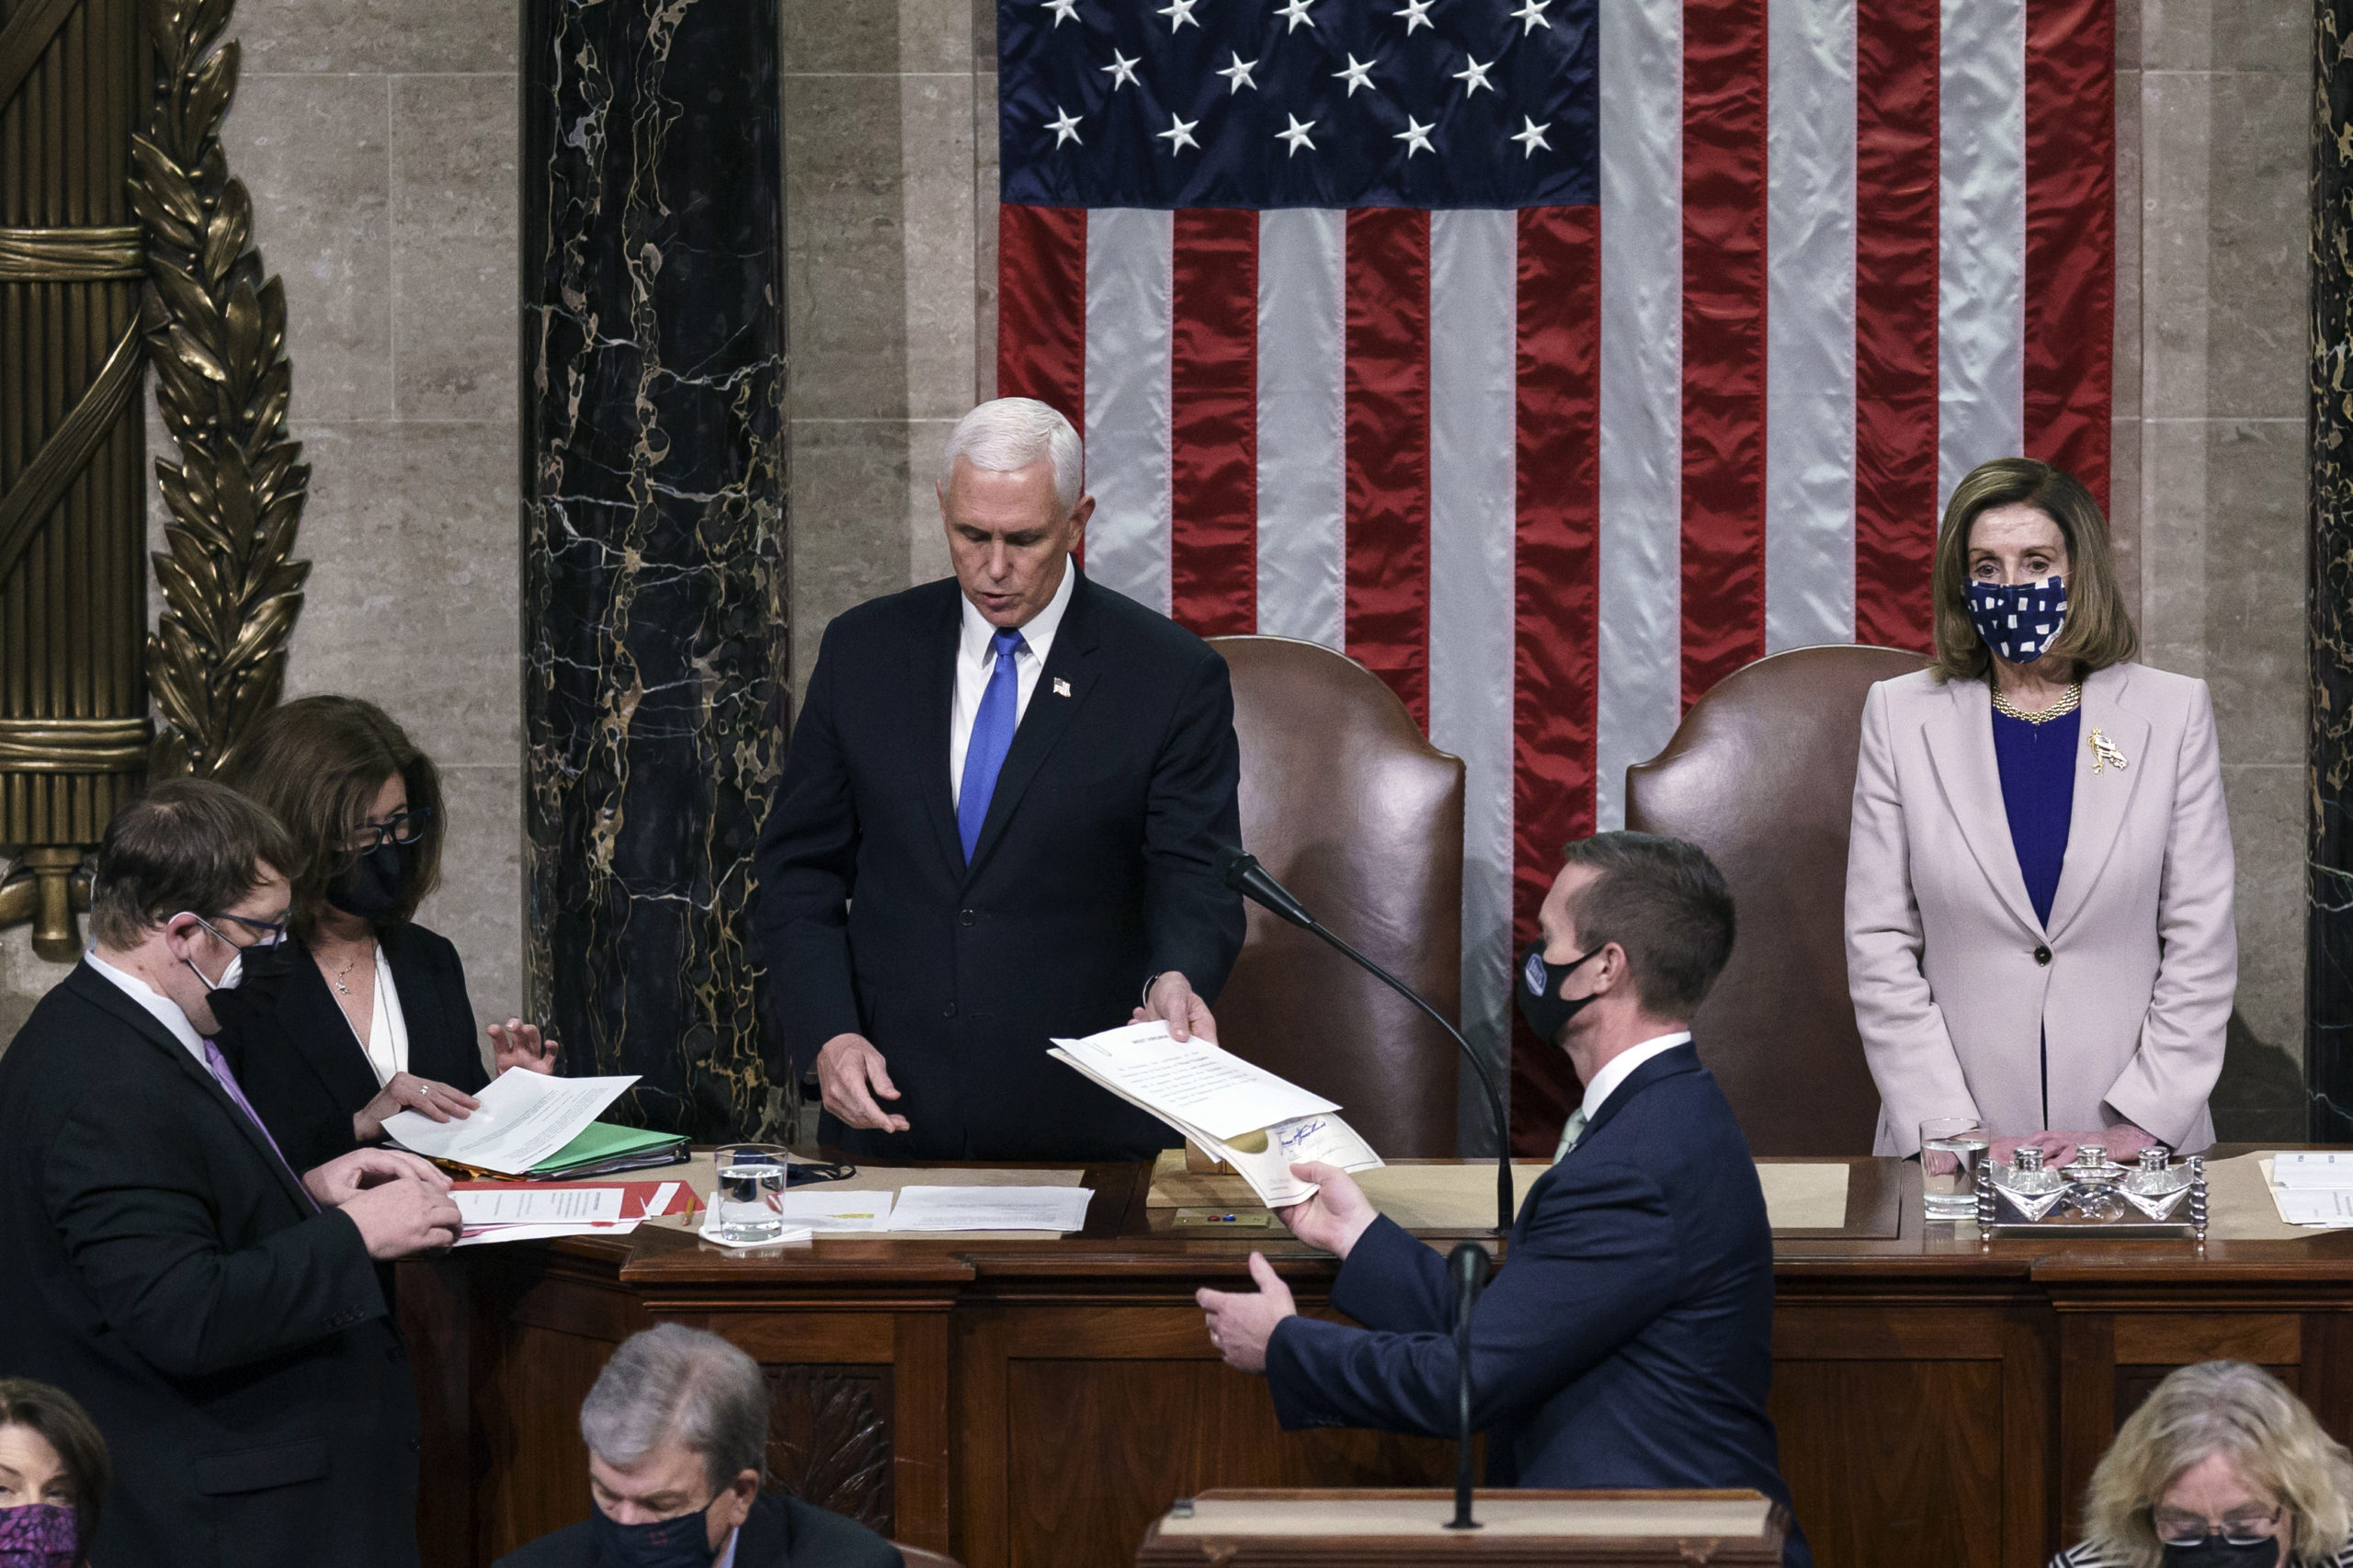 WASHINGTON, DC - JANUARY 07: Vice President Mike Pence hands the West Virginia certification to staff as Speaker of the House Nancy Pelosi, D-Calif., listen during a joint session of Congress after working through the night, at the Capitol. (J. Scott Applewhite - Pool/Getty Images)